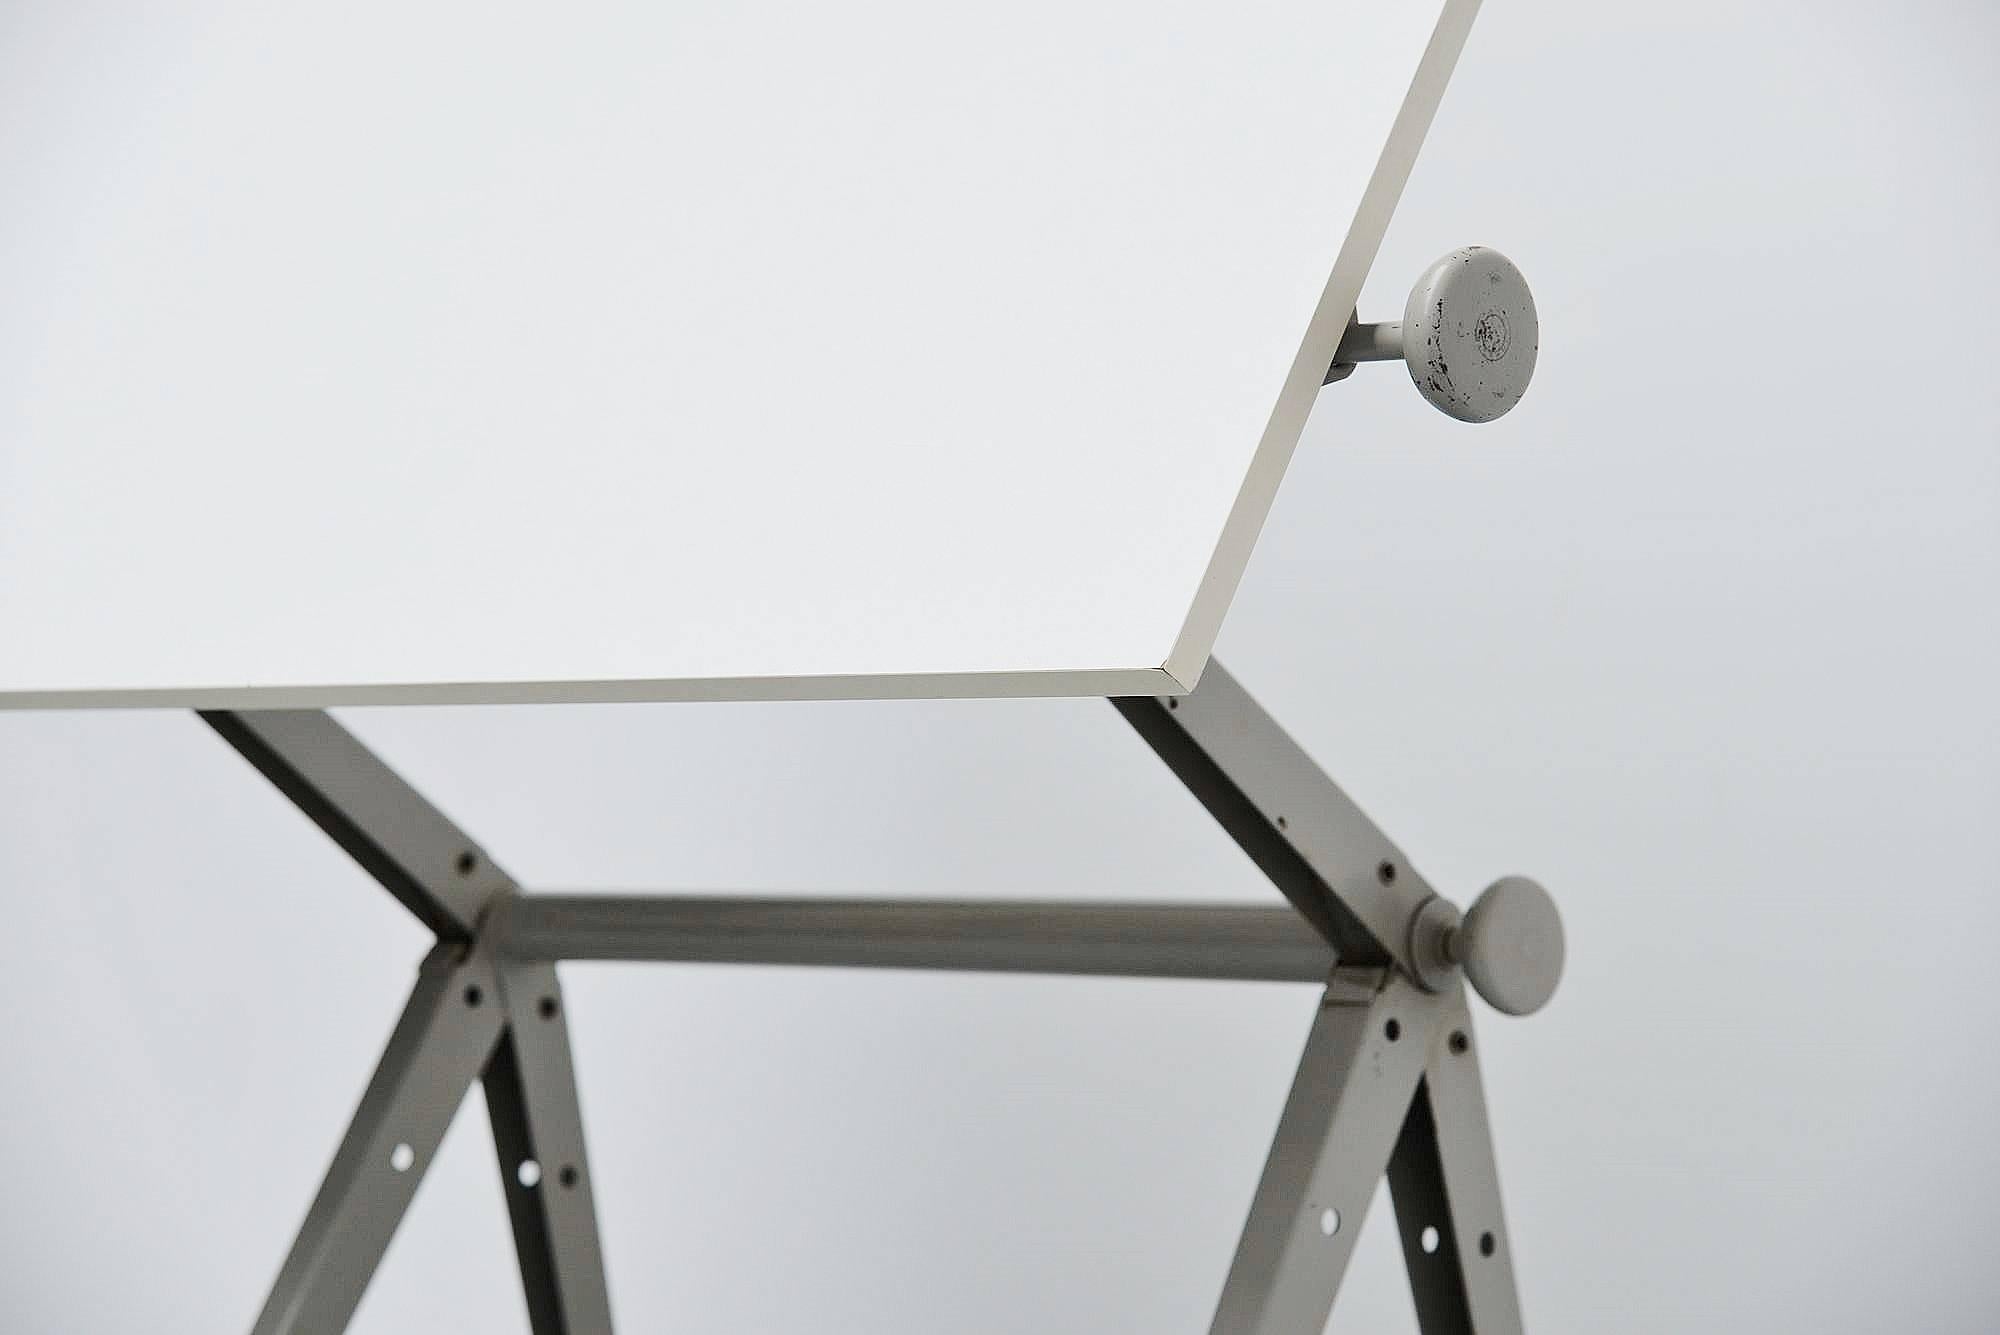 Ingenious drafting table designed by Wim Rietveld and Friso Kramer for Ahrend de Cirkel, Holland, 1963. The table is adjustable in numerous positions using an ingenious adjusting system using only two screws at the side. This table won a ´Signe